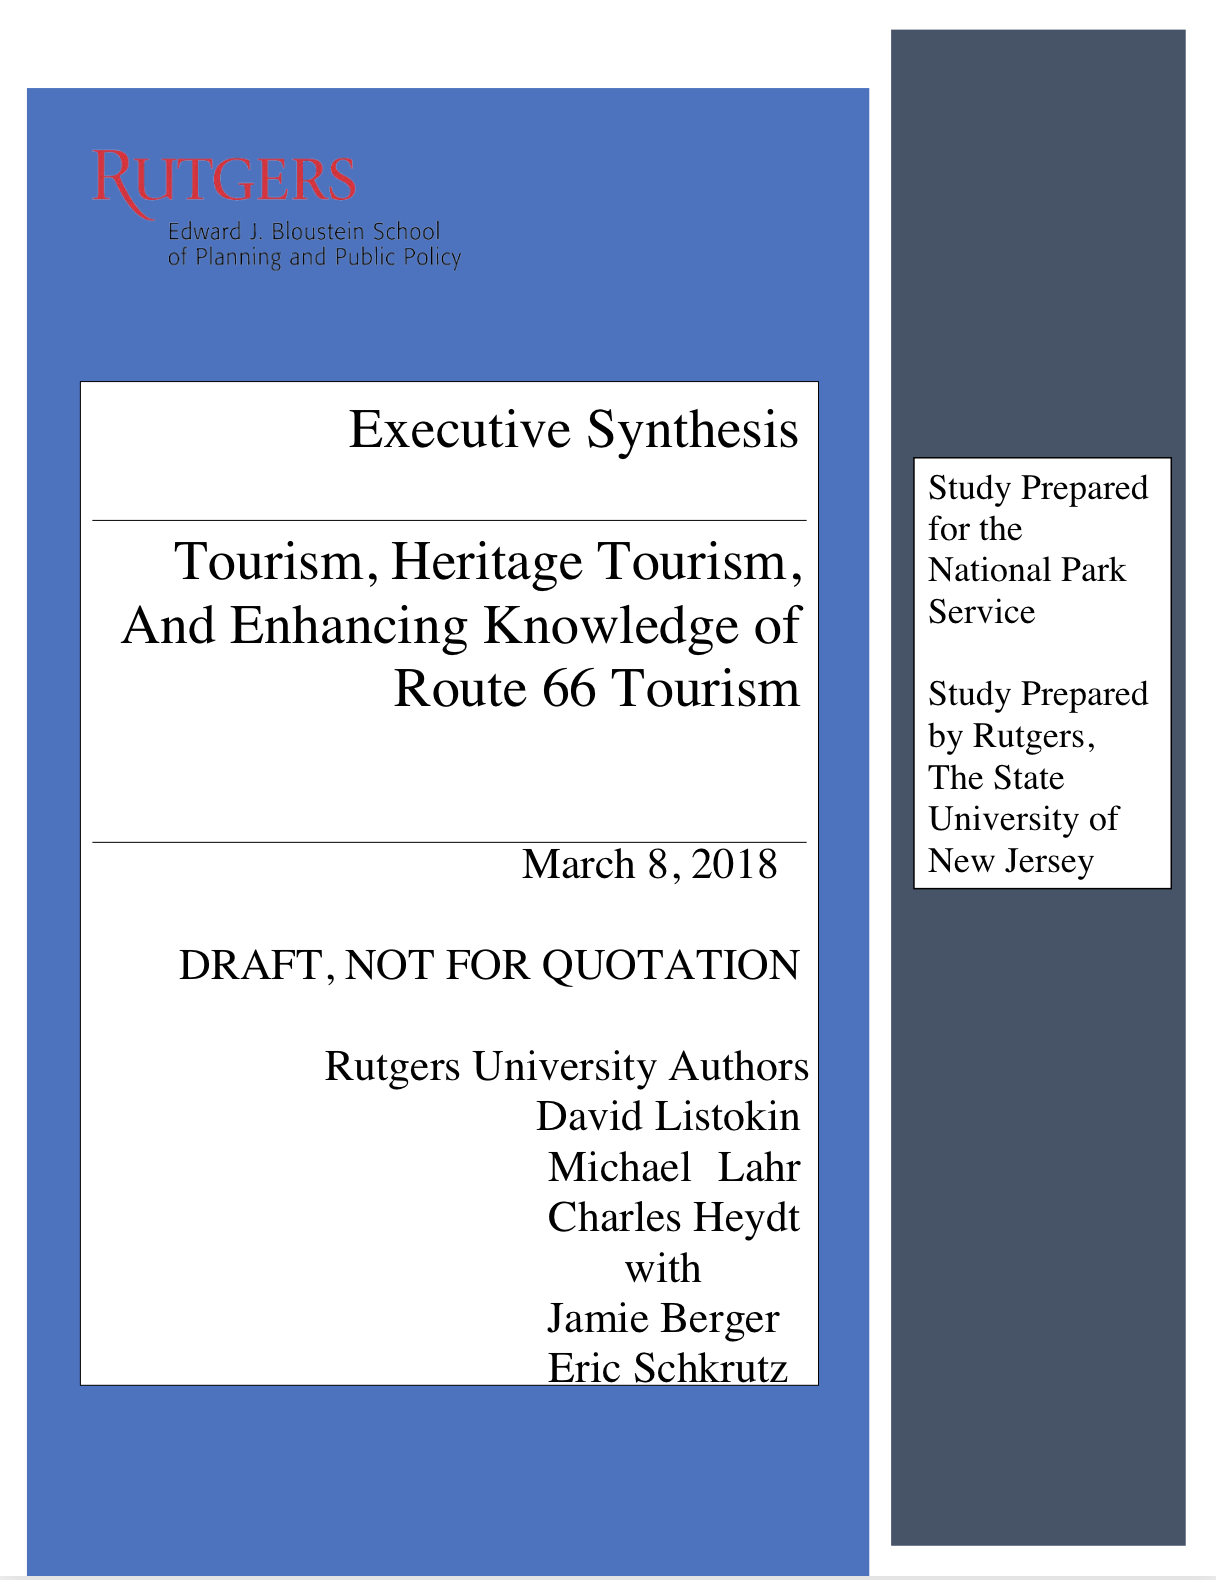 Executive Synthesis: Tourism, Heritage Tourism, And Enhancing Knowledge of Route 66 Tourism